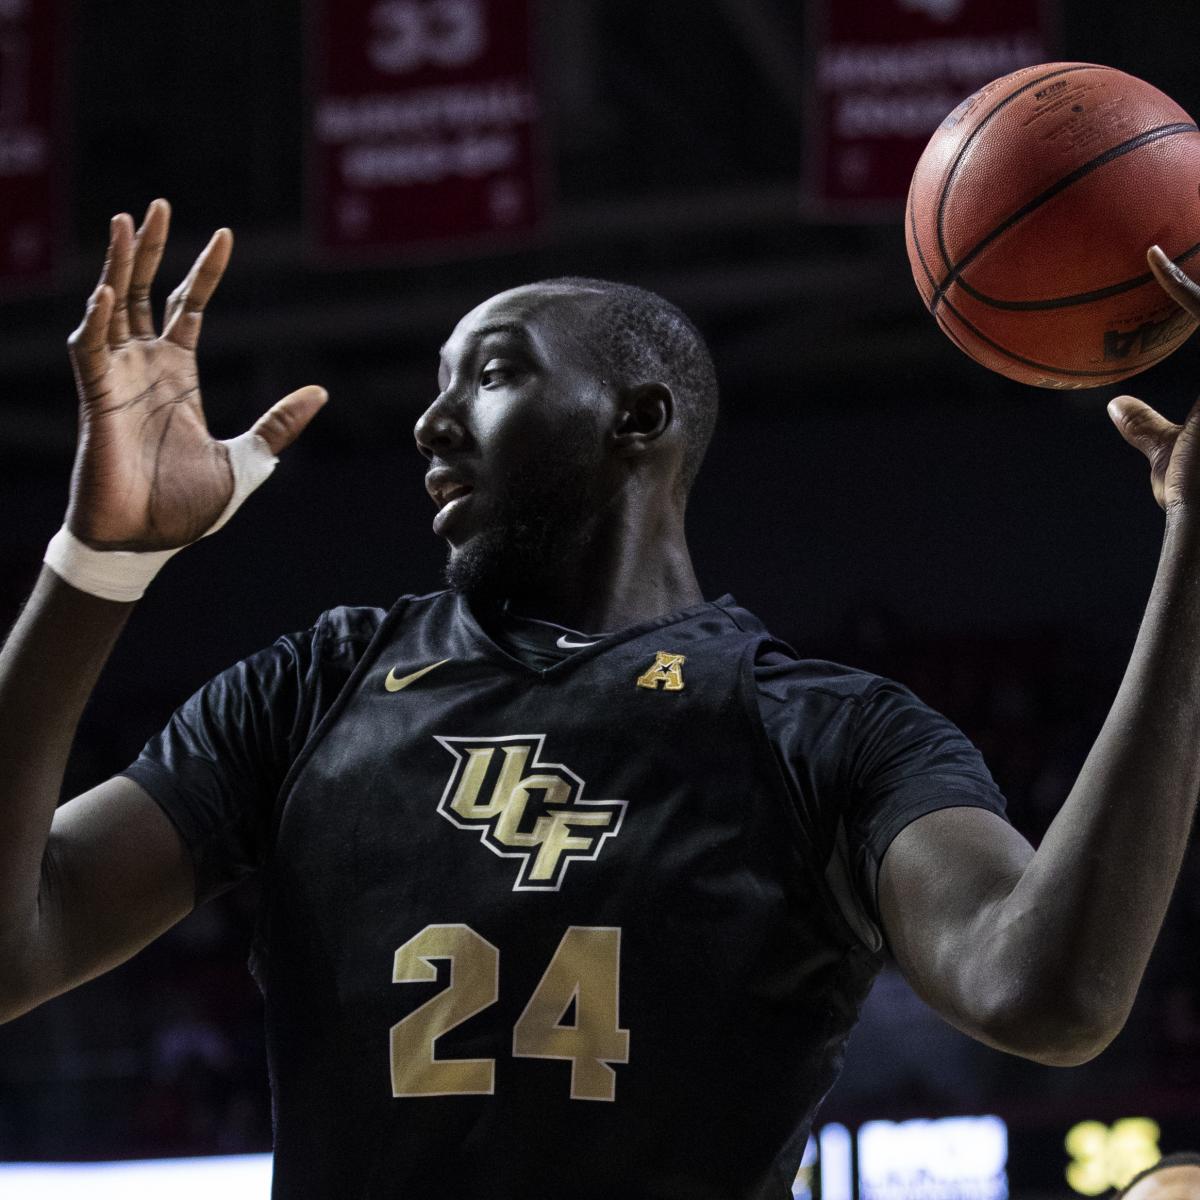 Celtics Sign Tacko Fall to Contract as Undrafted Free Agent After 2019 Draft